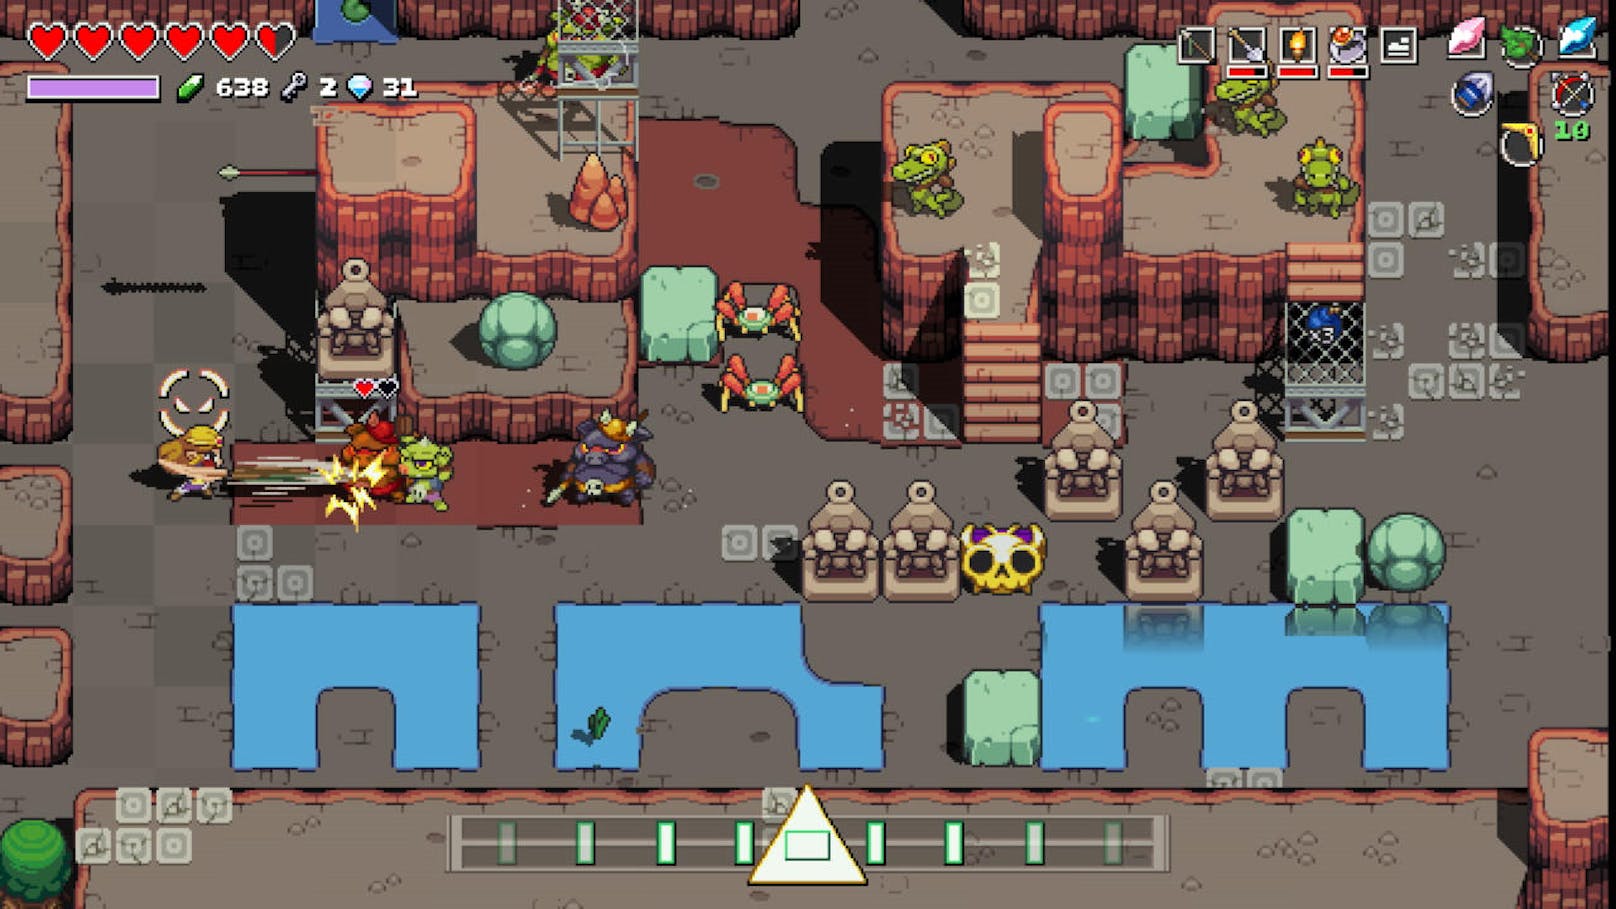  <a href="https://www.heute.at/digital/games/story/Cadence-of-Hyrule-im-Test--Ein-geniales-Zelda-Spinoff-57573658" target="_blank">Cadence of Hyrule - Crypt of the NecroDancer featuring the Legend of Zelda</a>